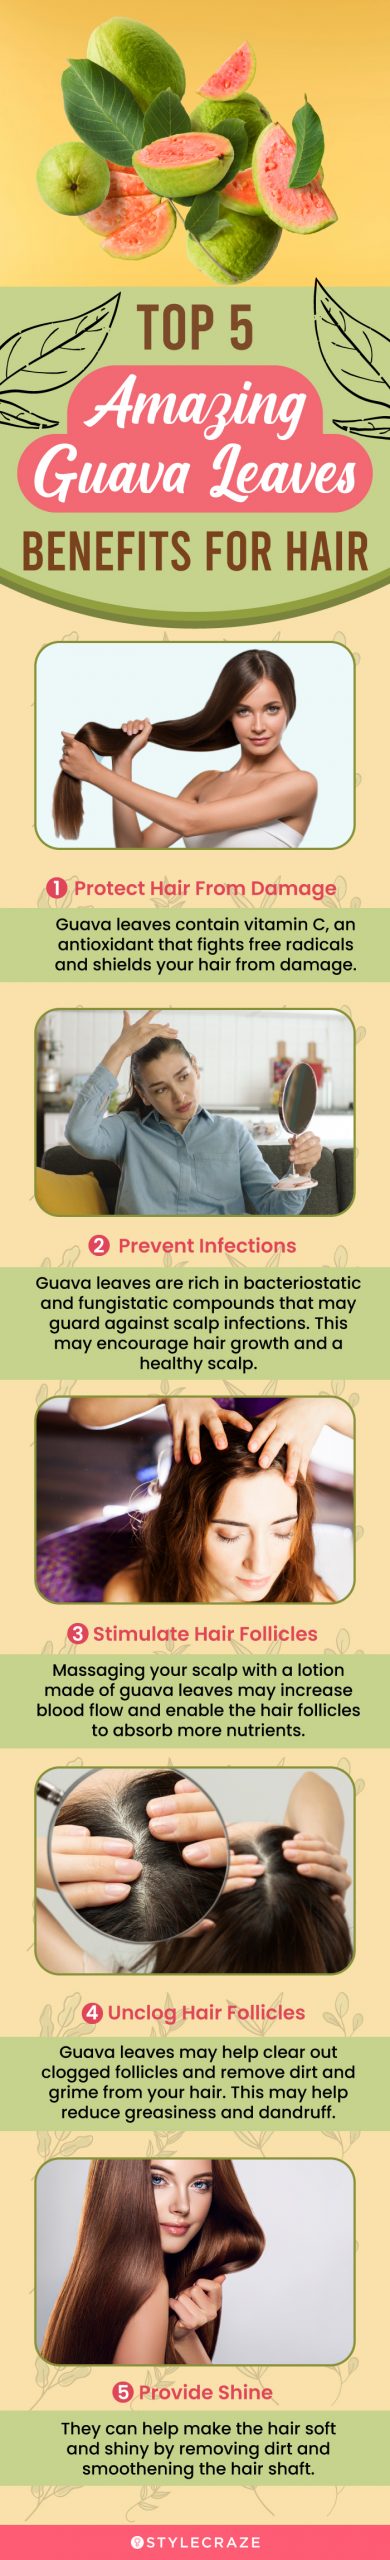 5 DIY Ways To Use Guava Leaves for Hair Growth  lifeberryscom